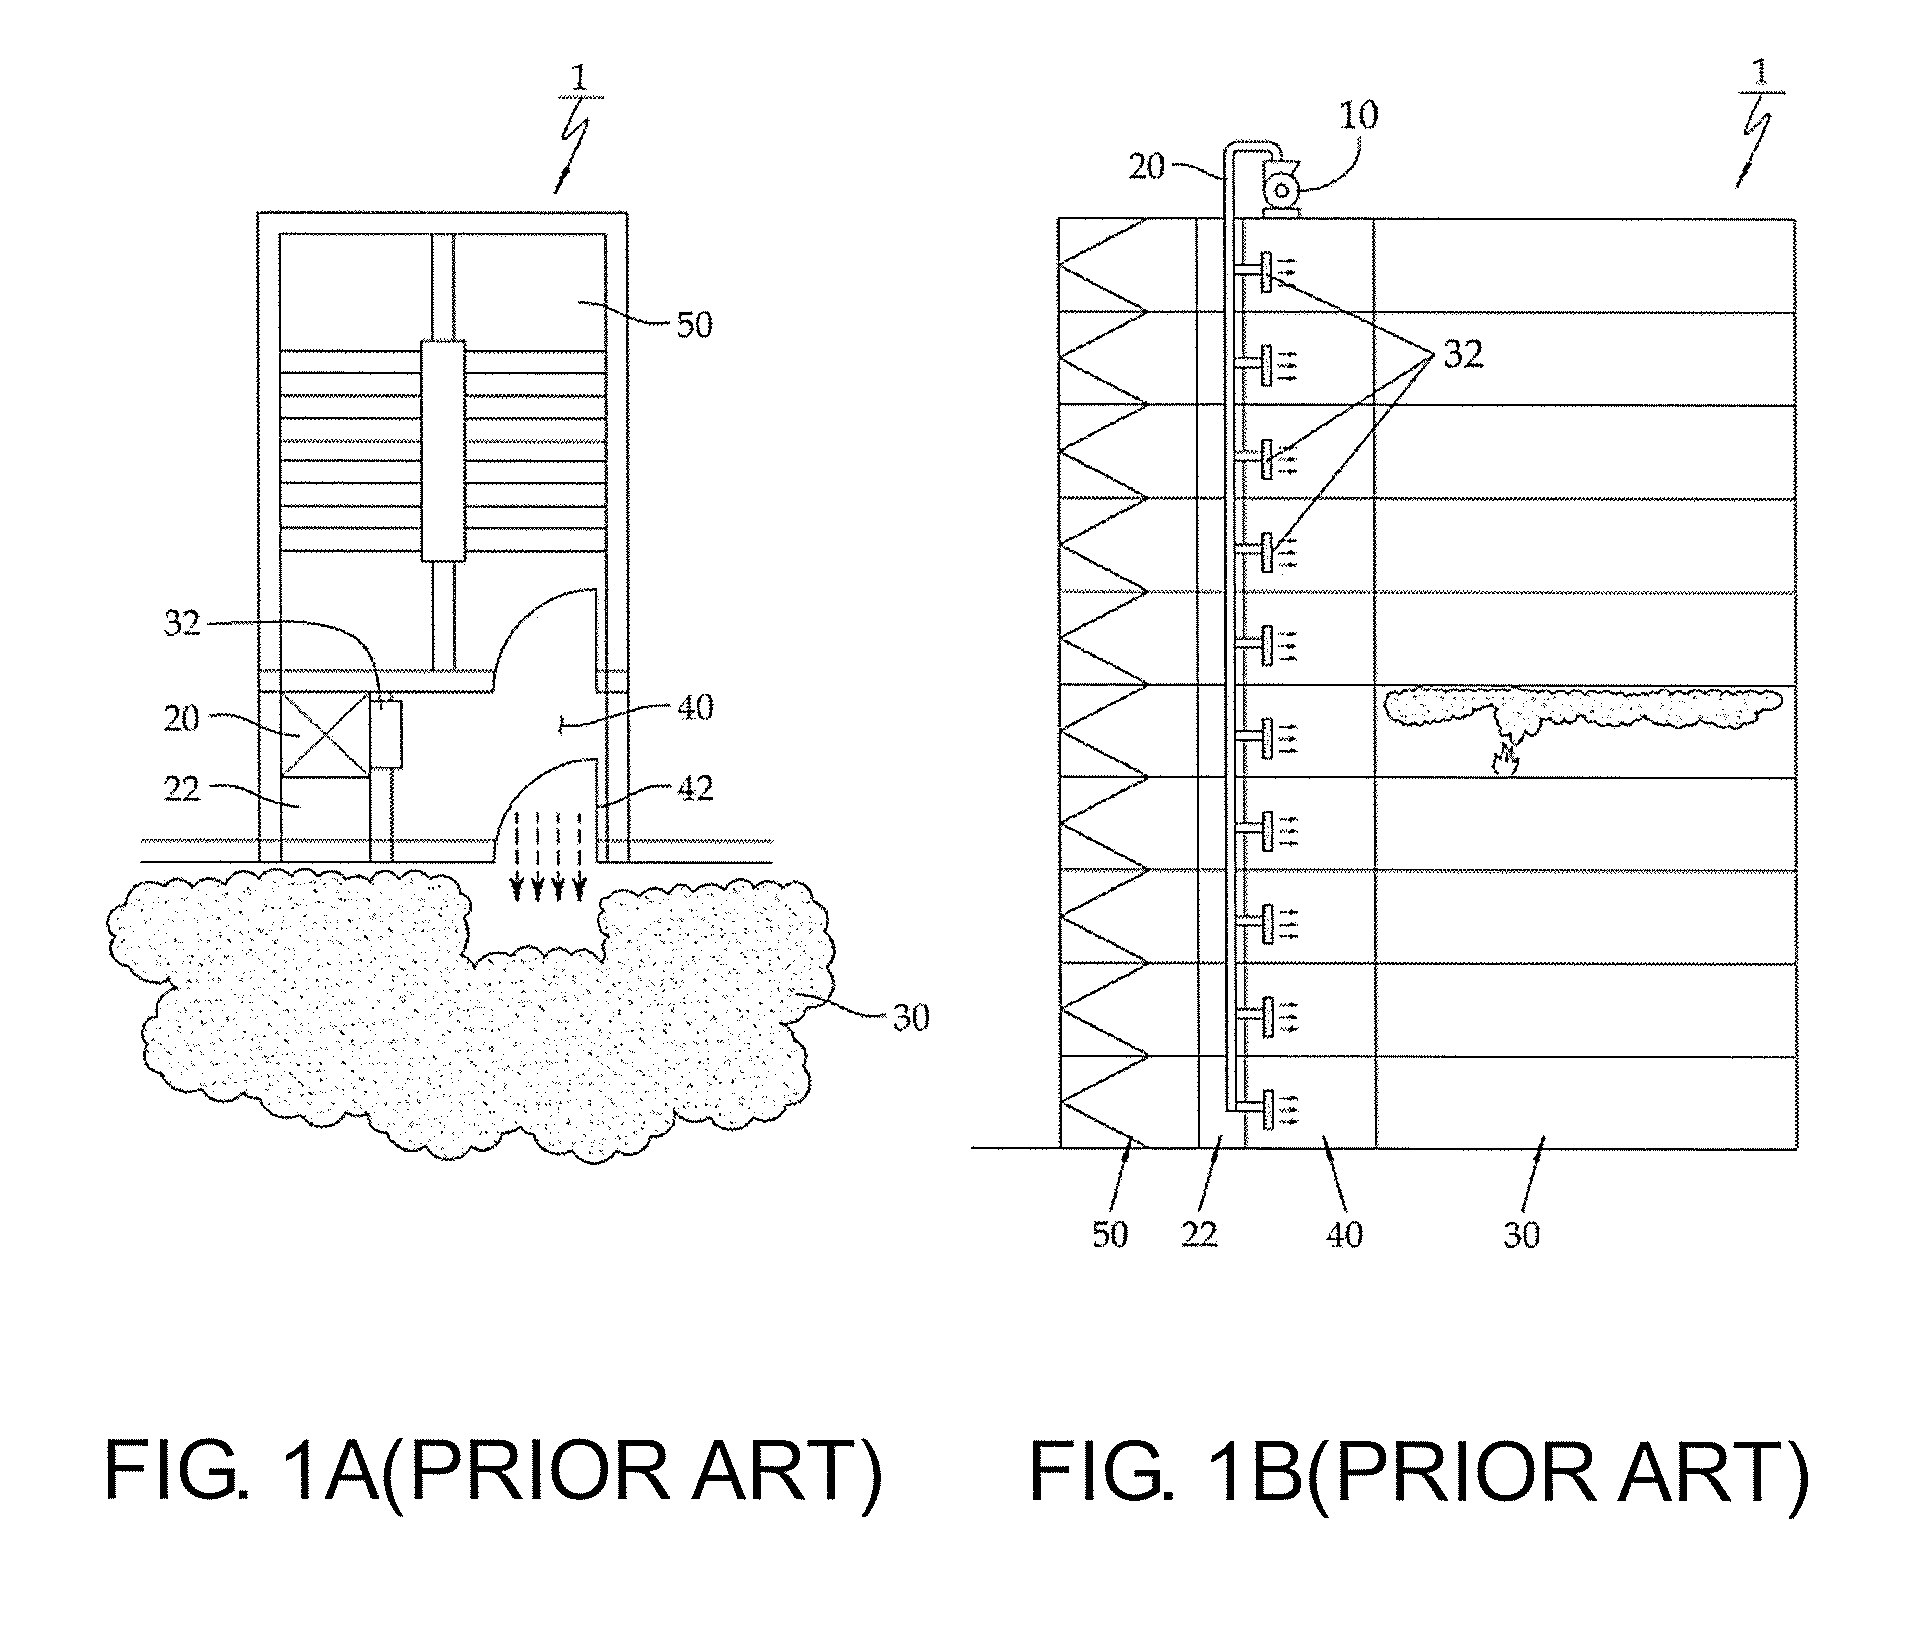 Air supply damper for separately supplying leakage air flow and supplementary air flow, method for controlling the same, and smoke control system utilizing the same